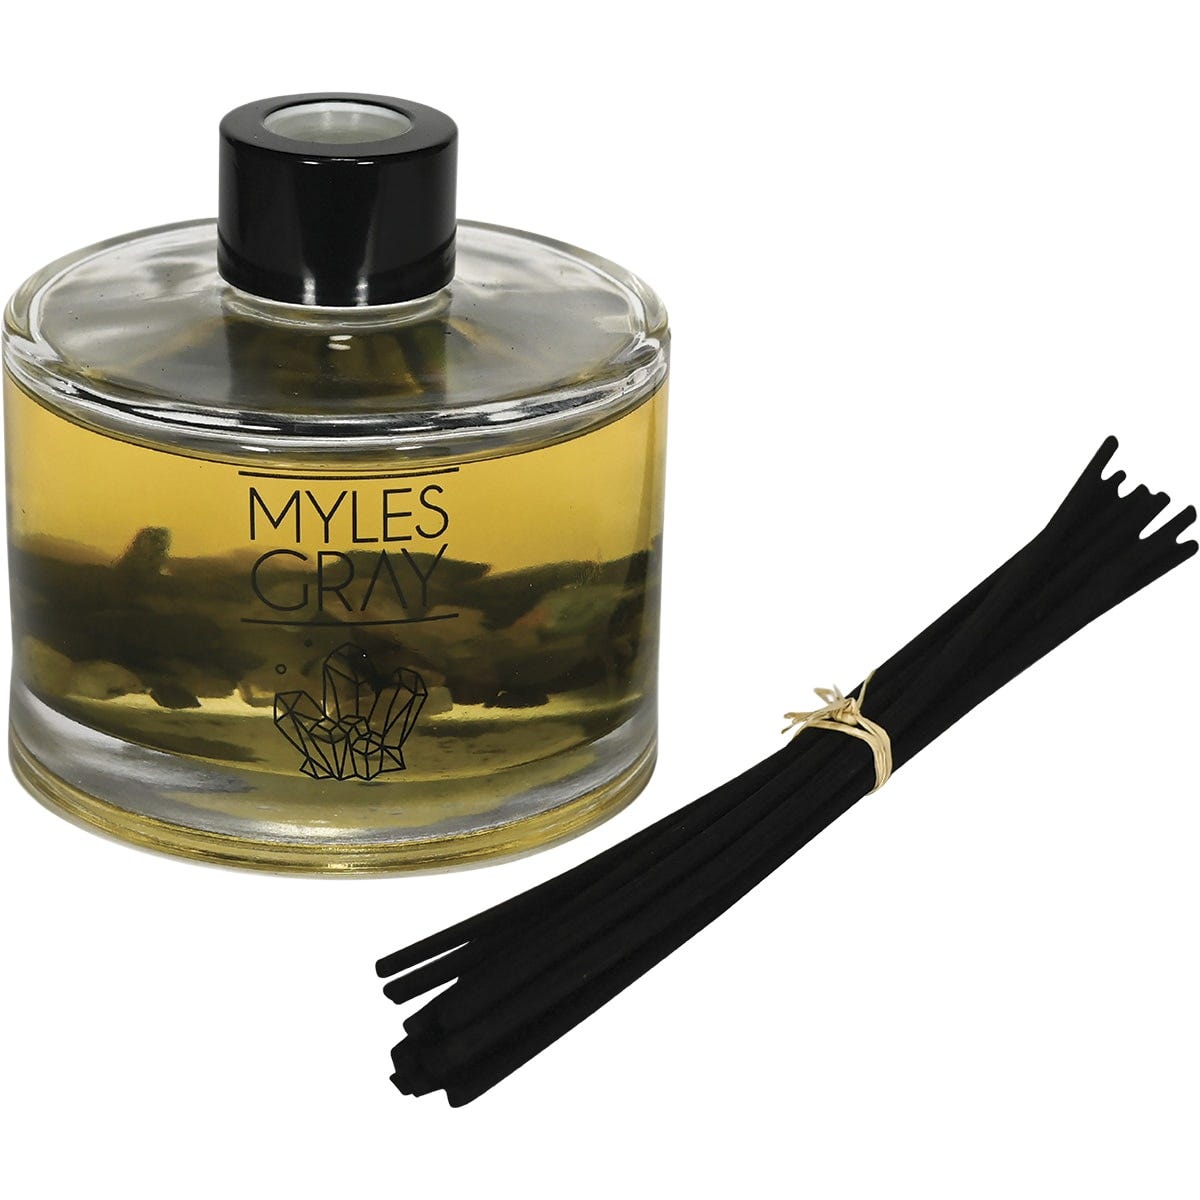 Myles Gray Crystal Infused Reed Diffuser Citrus Burst